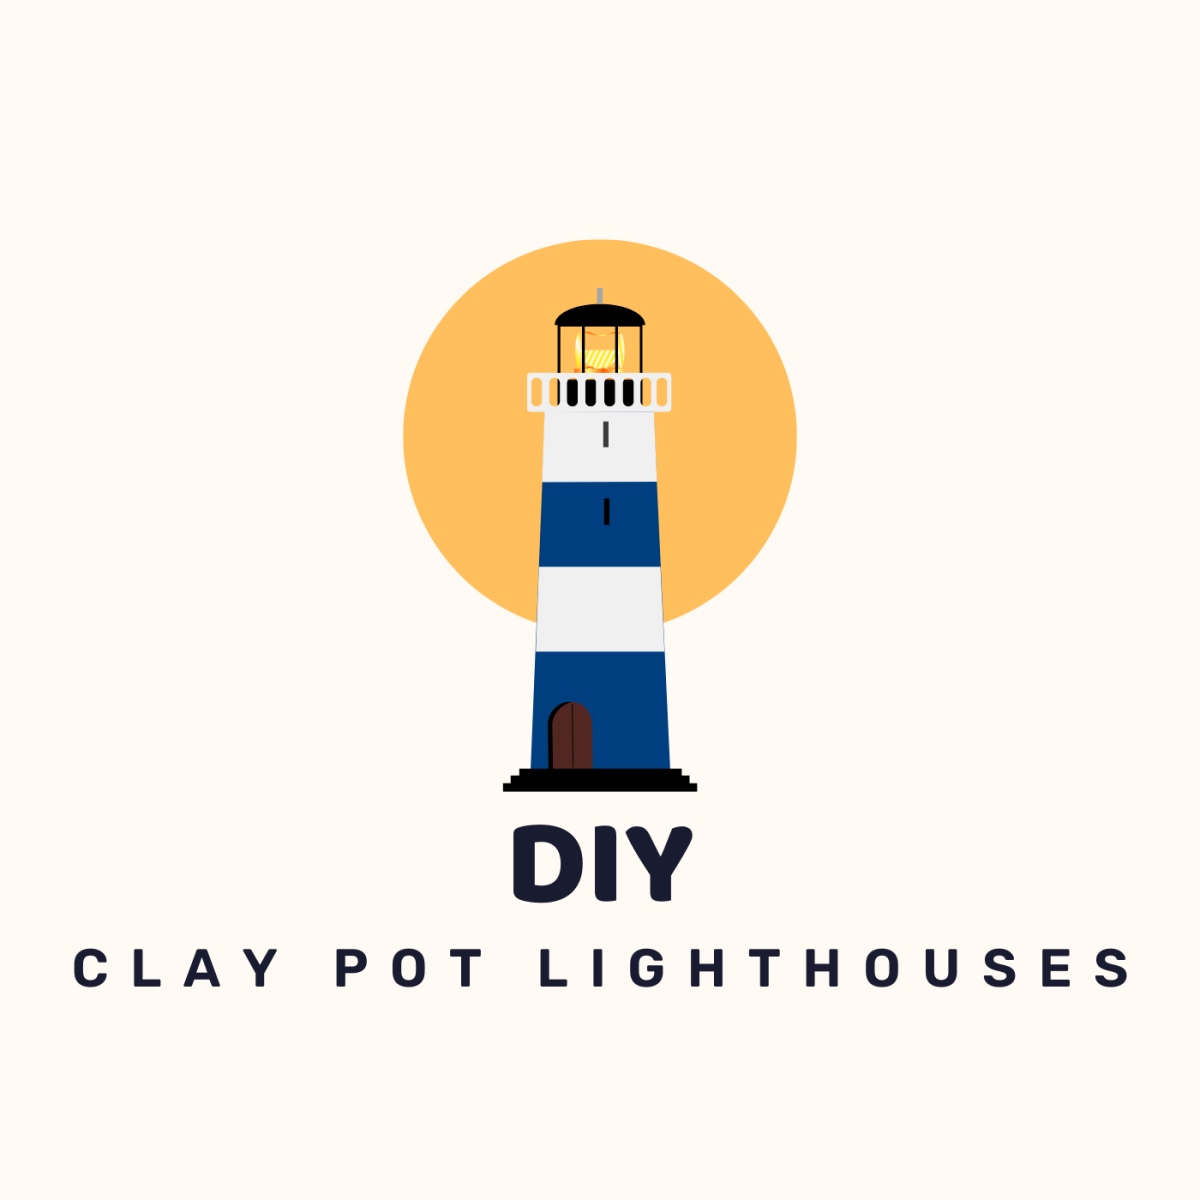 20+ DIY Clay Pot Lighthouses That Are Truly Works of Art